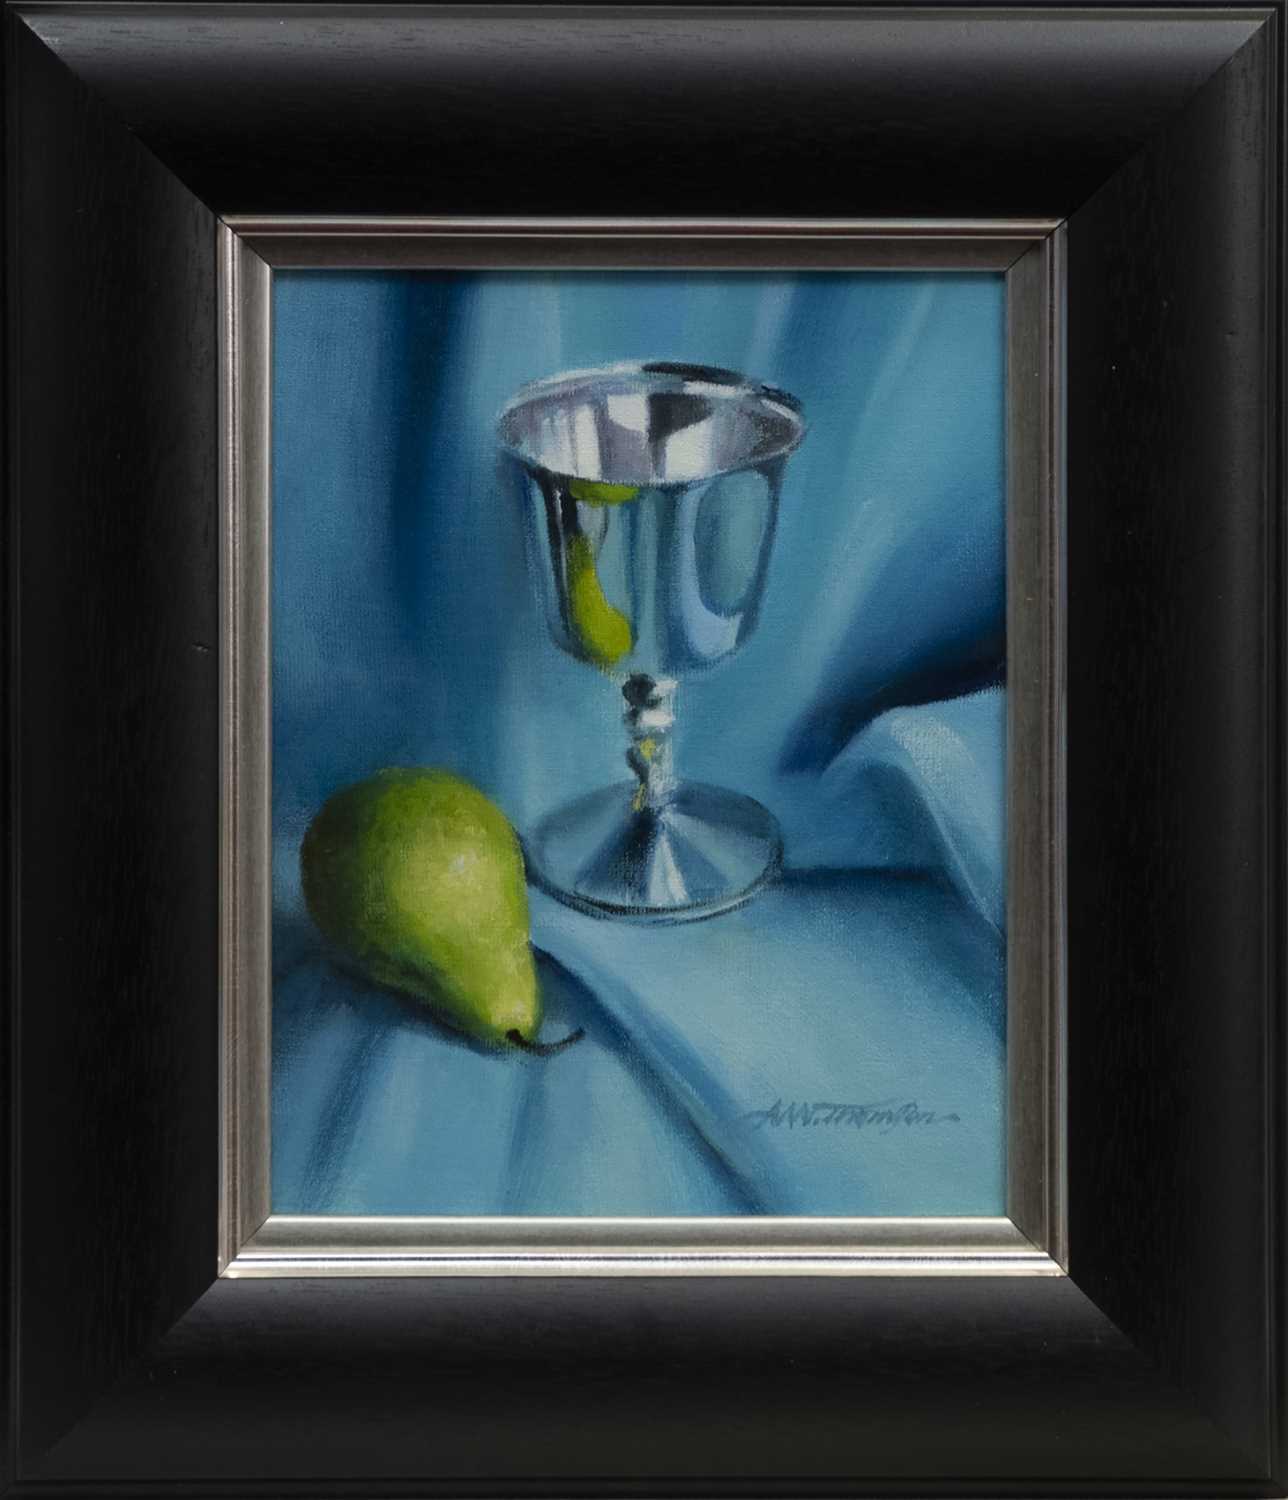 Lot 77 - SILVER GOBLET AND PEAR, AN OIL BY ALASTAIR THOMSON